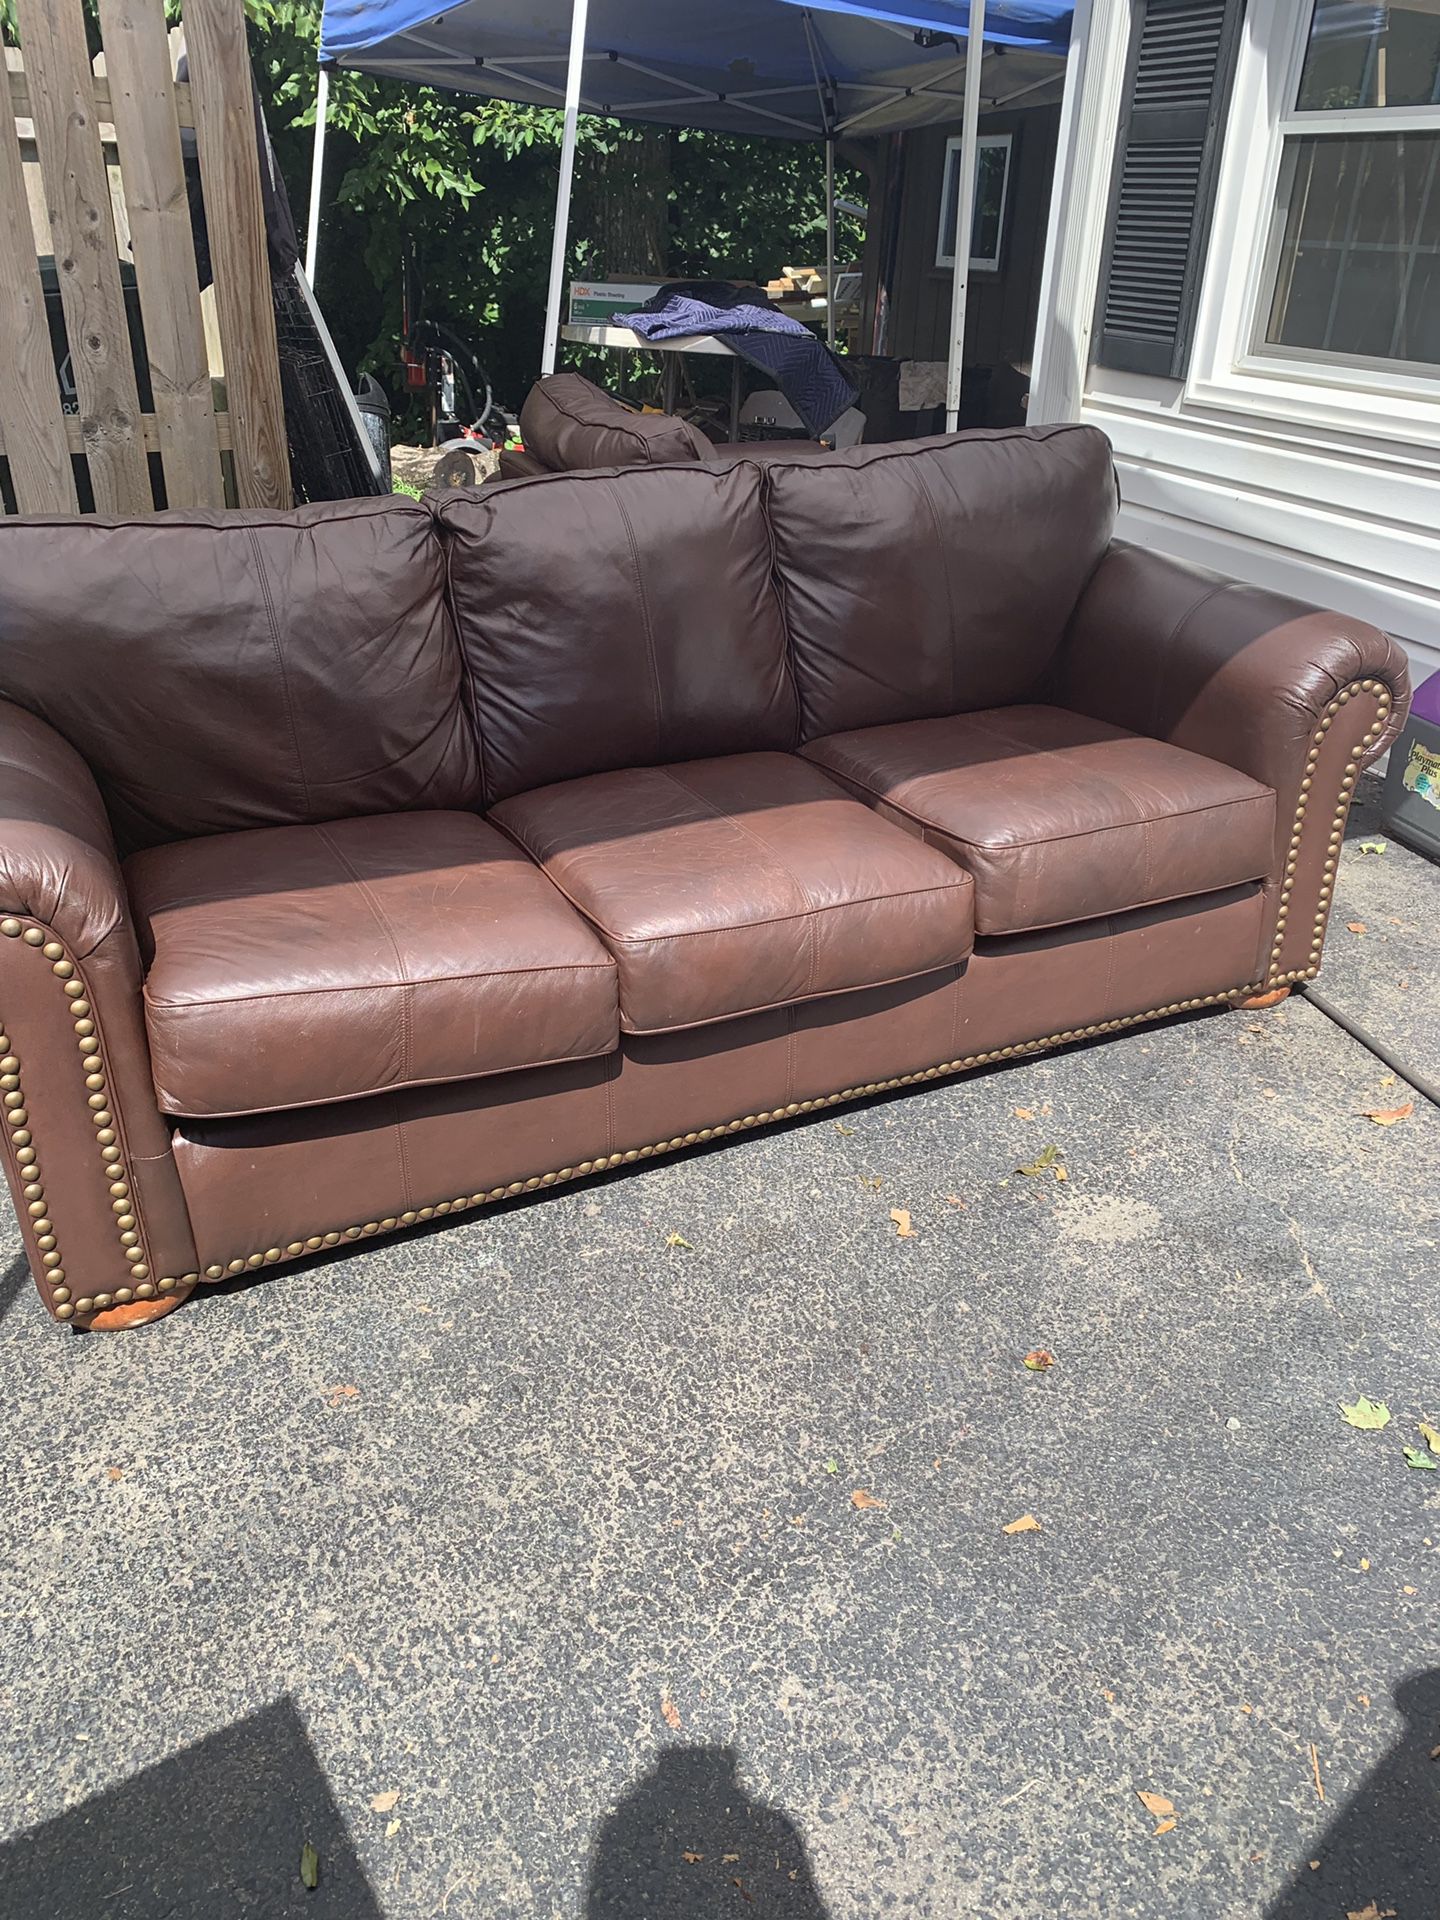 Ethan Allen leather sofa and oversized chair. Sofa is a sleeper